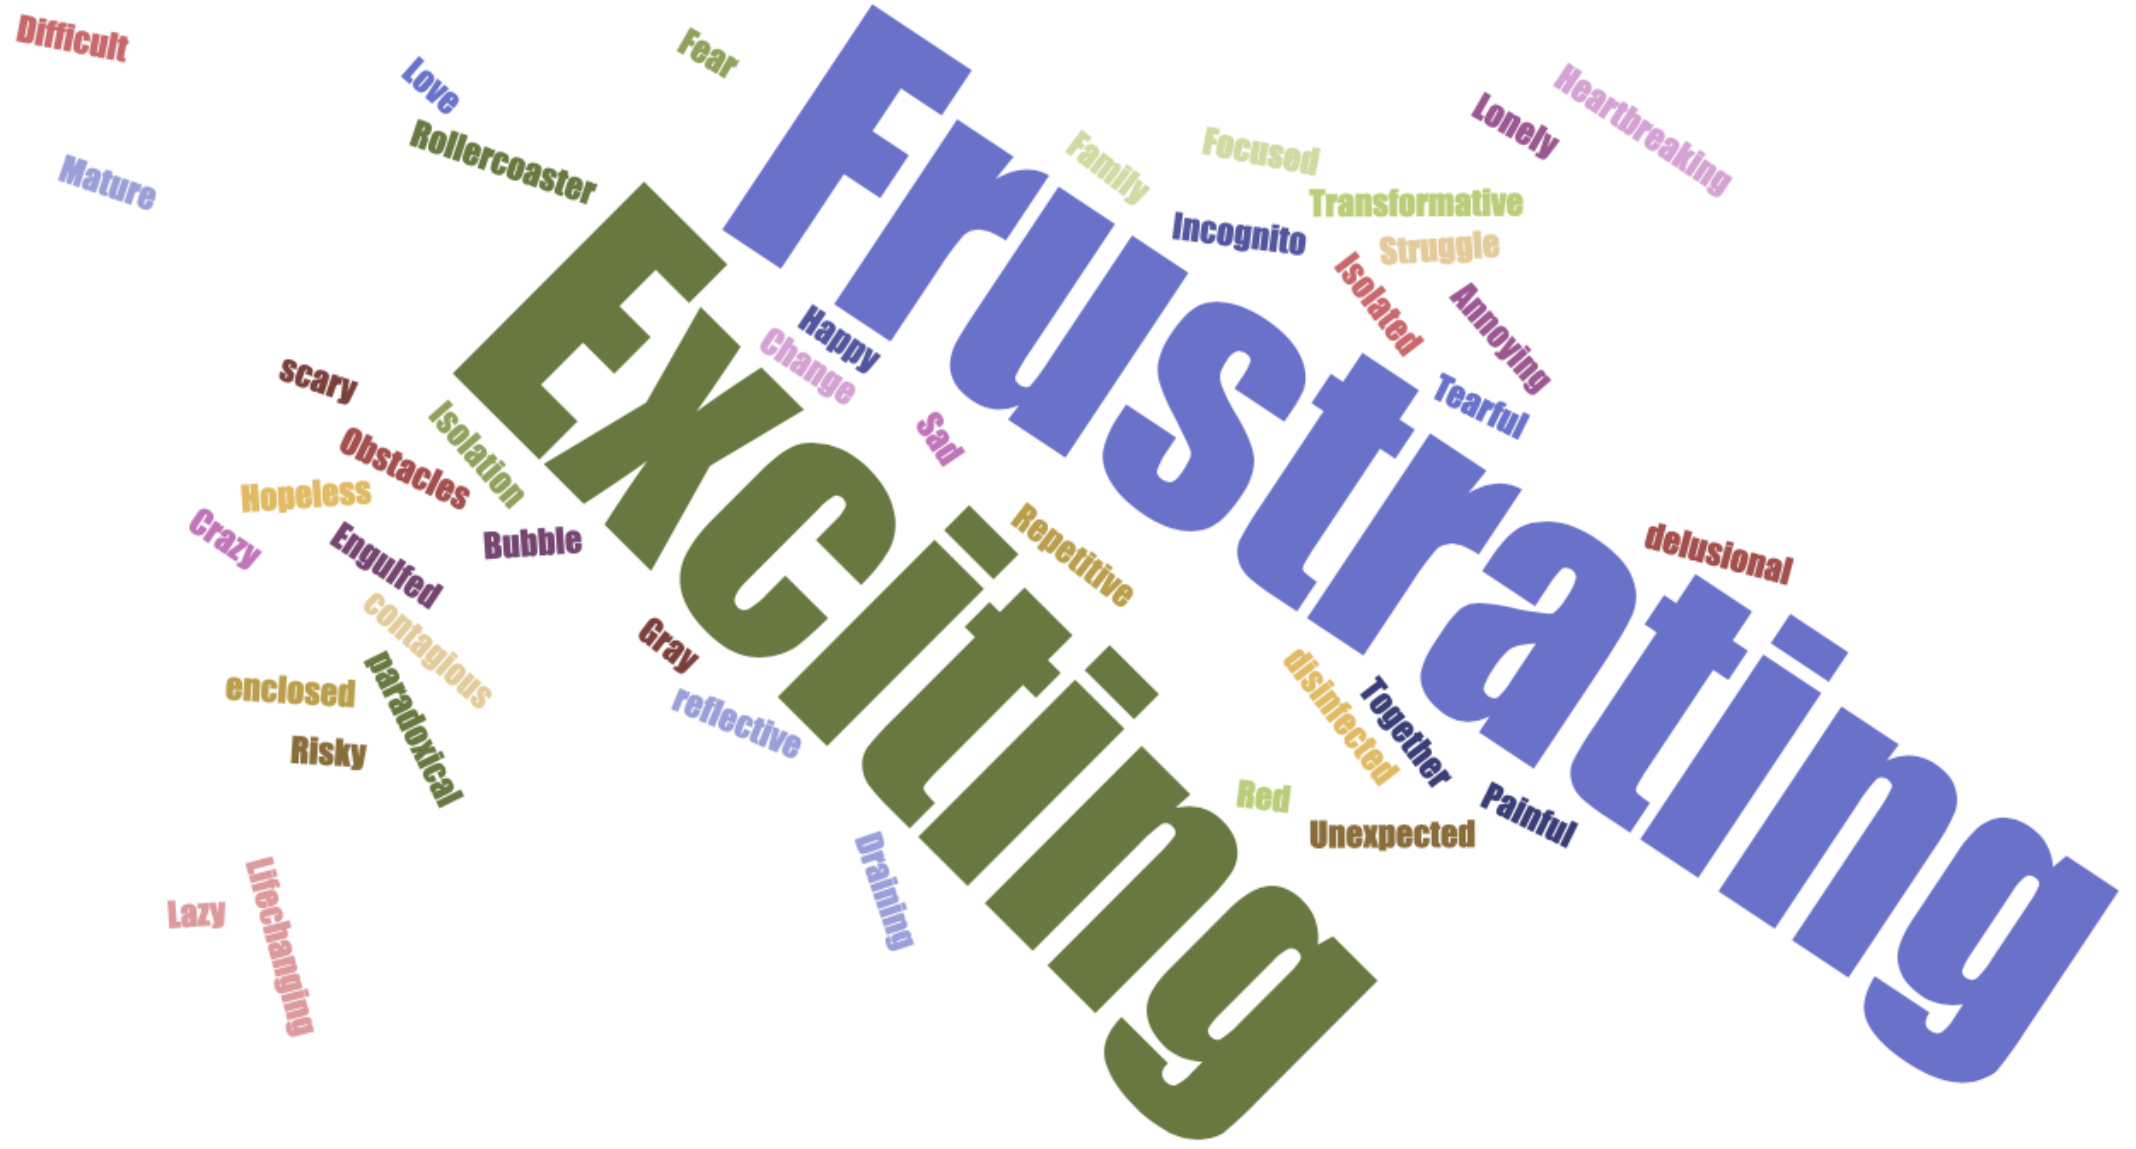 A wordcloud of quarantine-related adjectives and emotions. The two largest words by a wide margin are "frustrating" and "exciting".